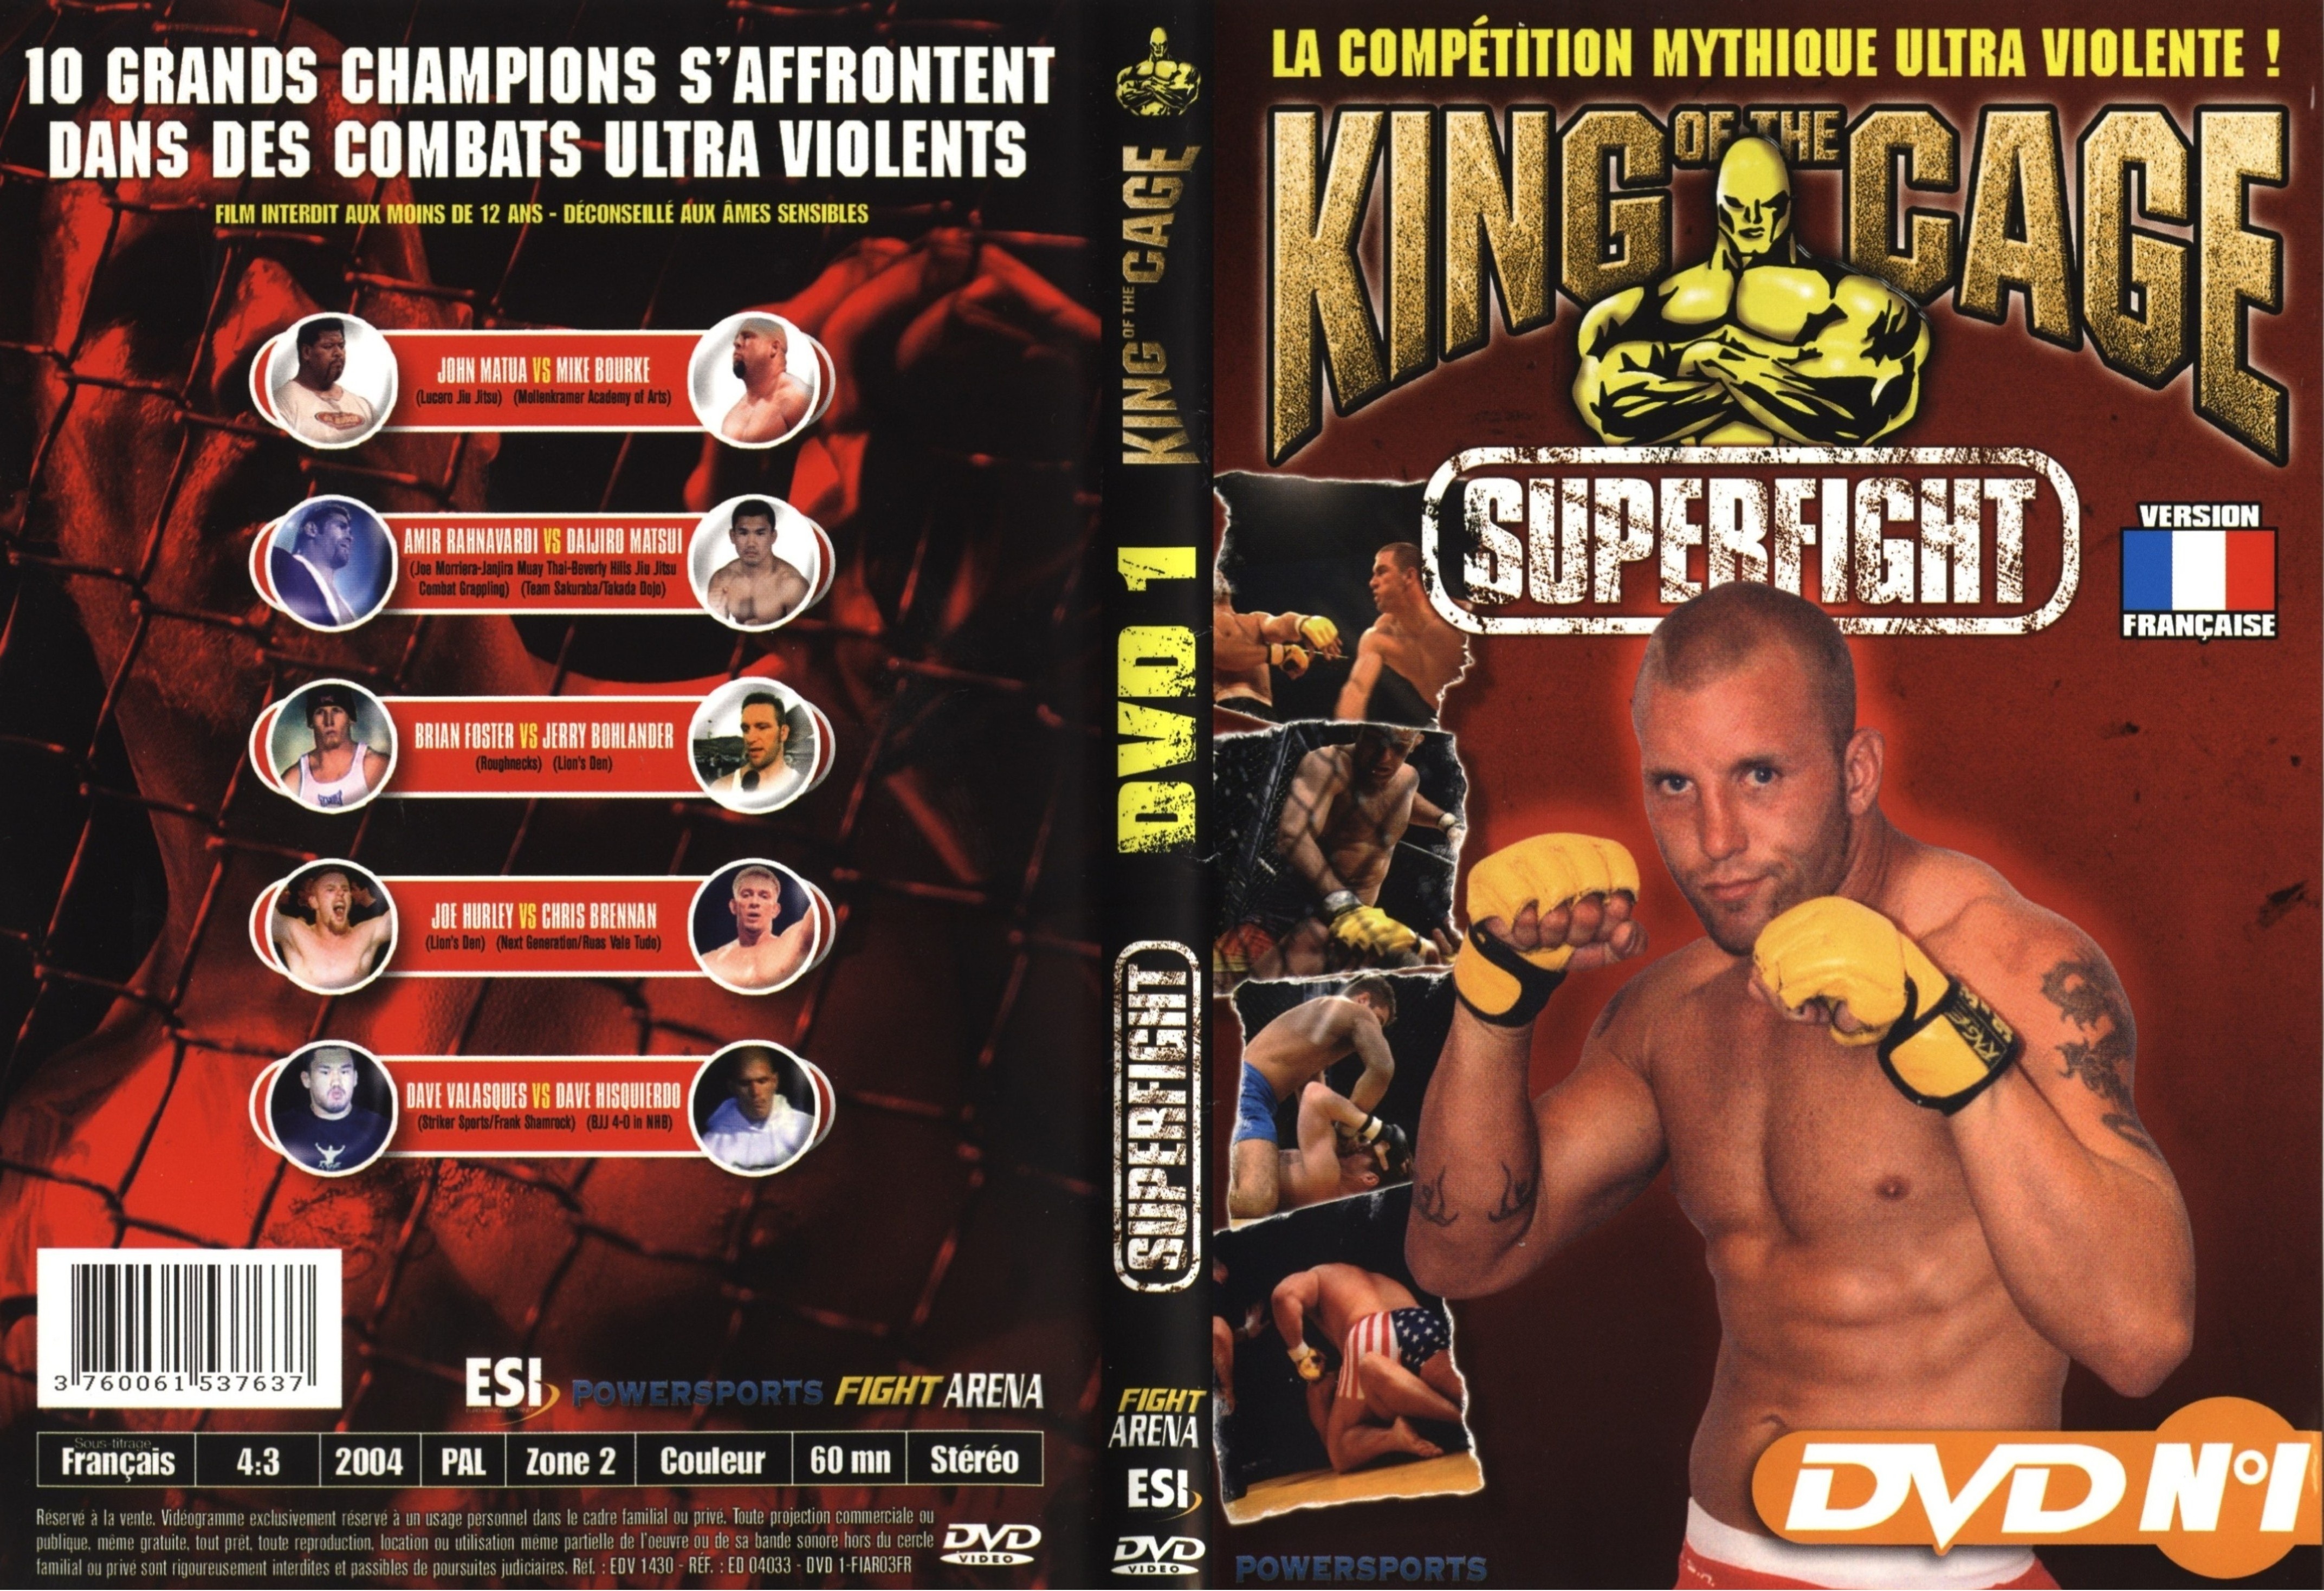 Jaquette DVD King of the cage superfight DVD 1